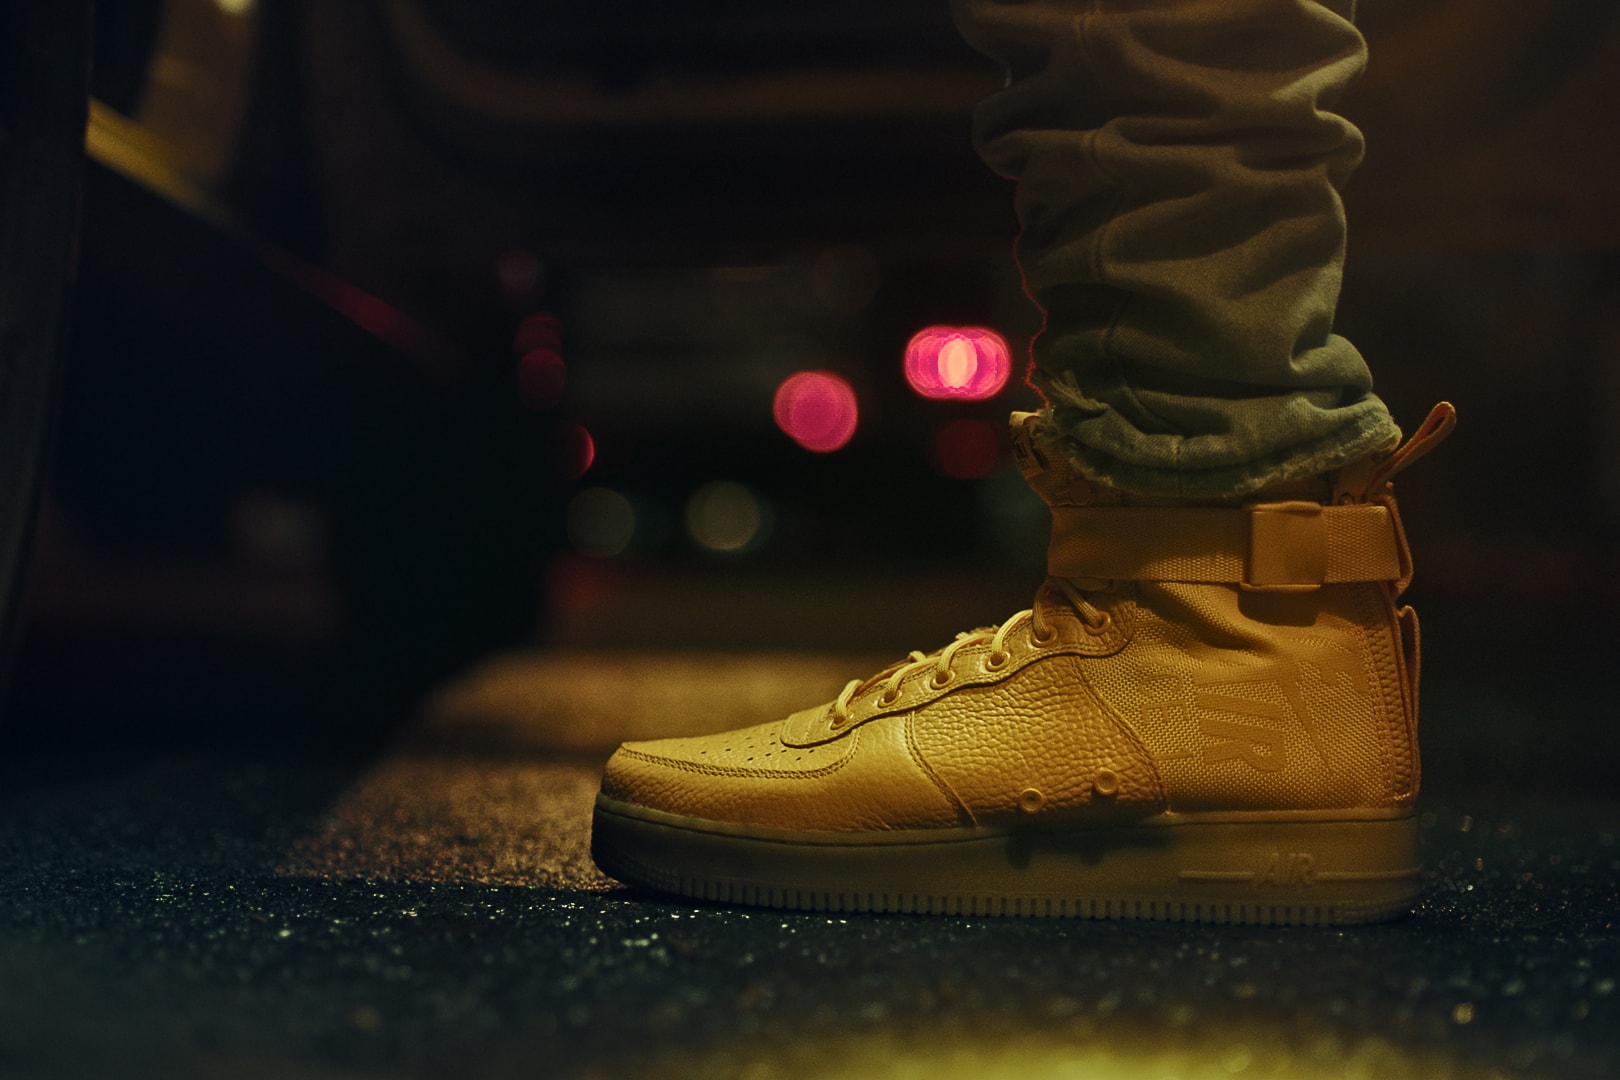 Odell Beckham Jr Nike SF AF1 Mid NYC yellow taxi footwear